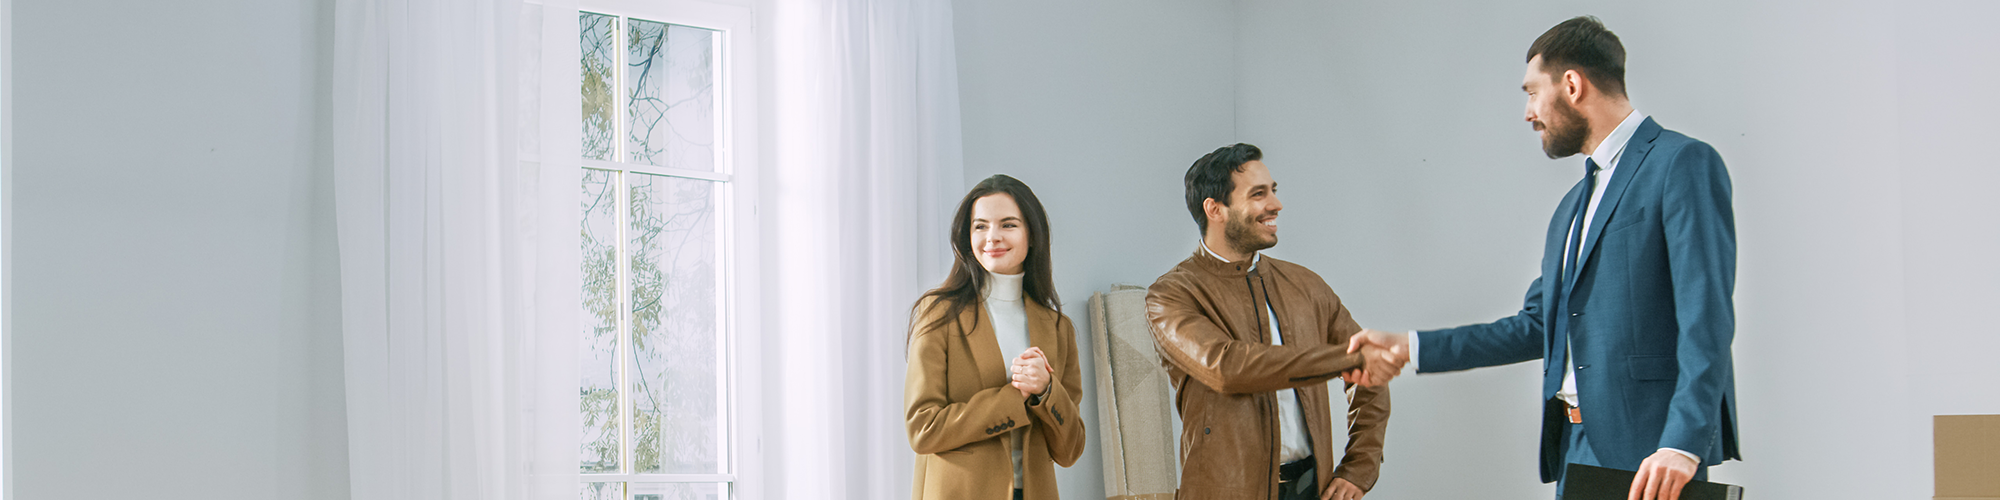 An estate agent shows a young couple around a property viewing. Estate Agents' Legal Obligations to Buyers and Sellers explained by SAM Conveyancing